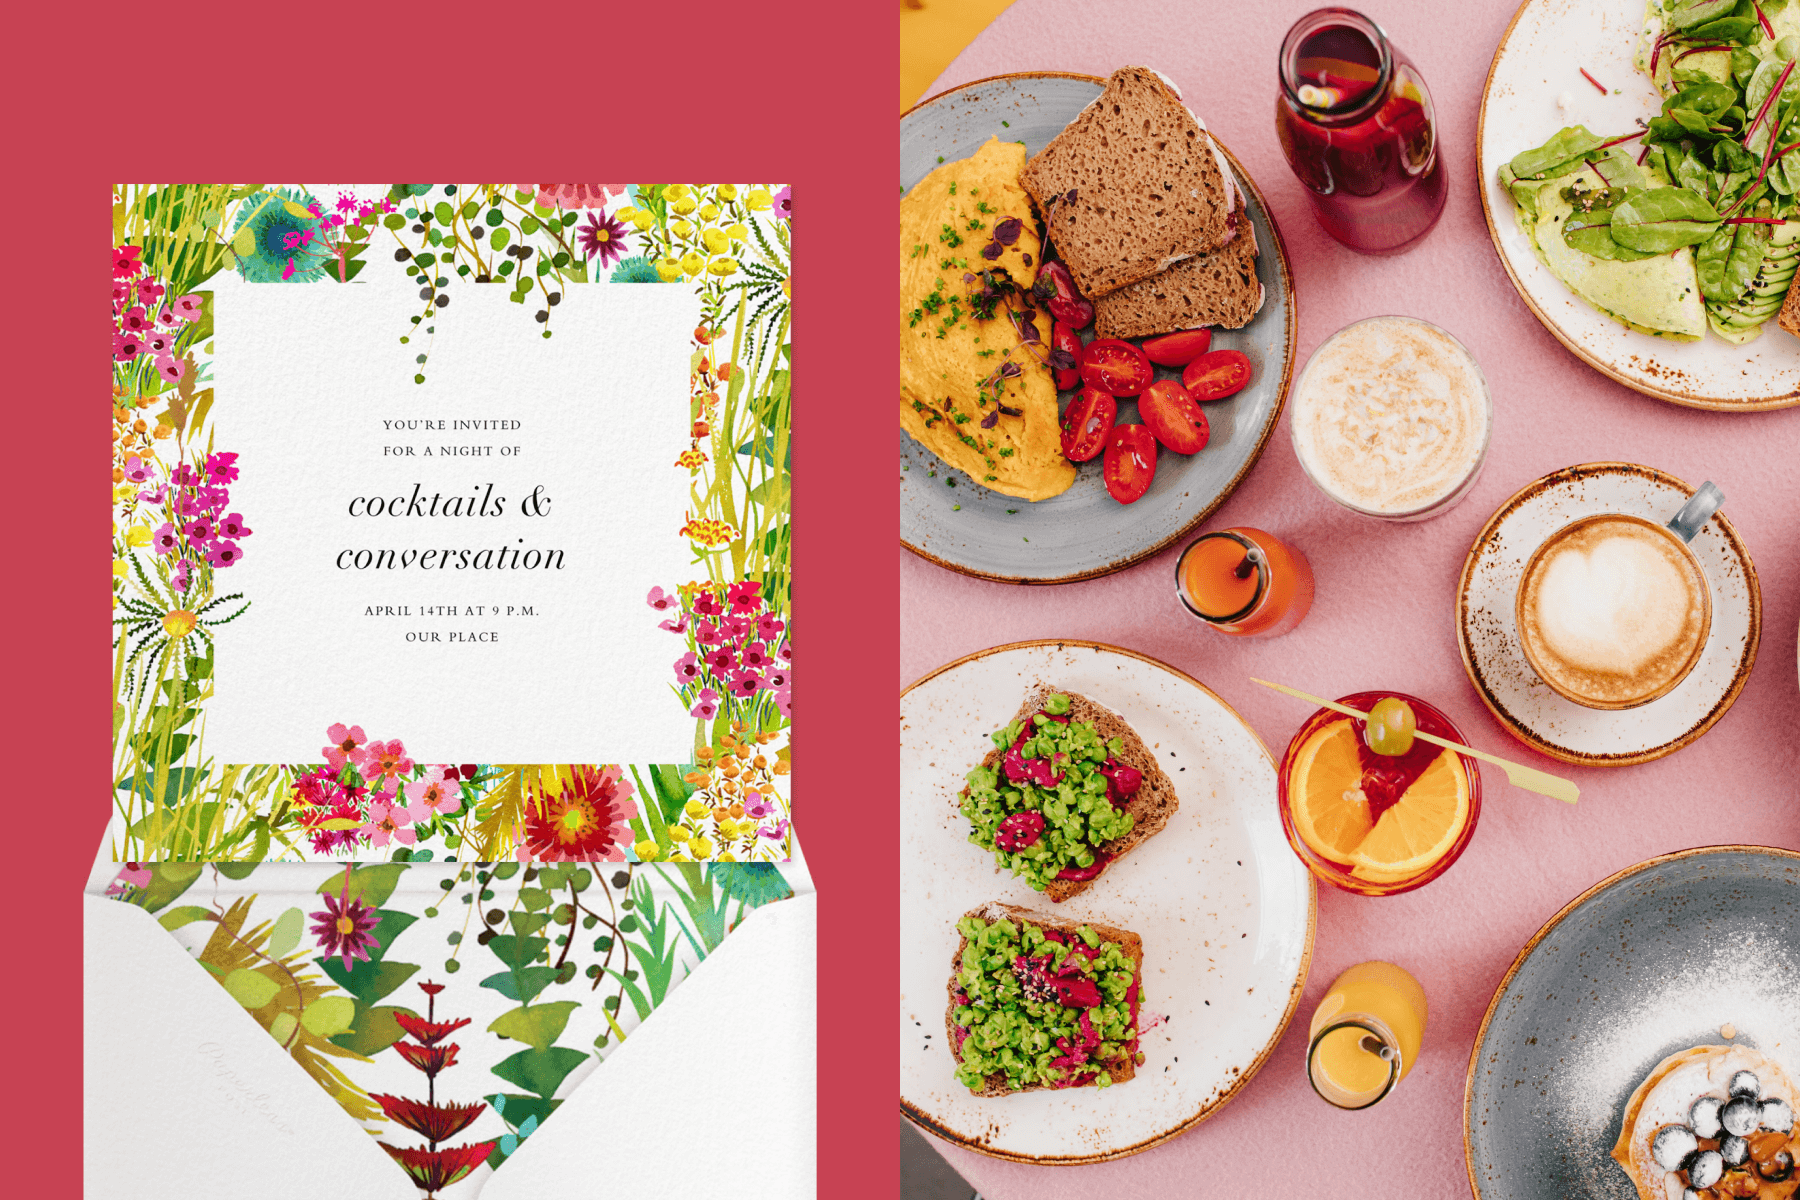 Left: A bright floral 21st birthday invitation; Right: An overhead shot of breakfast and brunch items like eggs, lattes, and avocado toast.